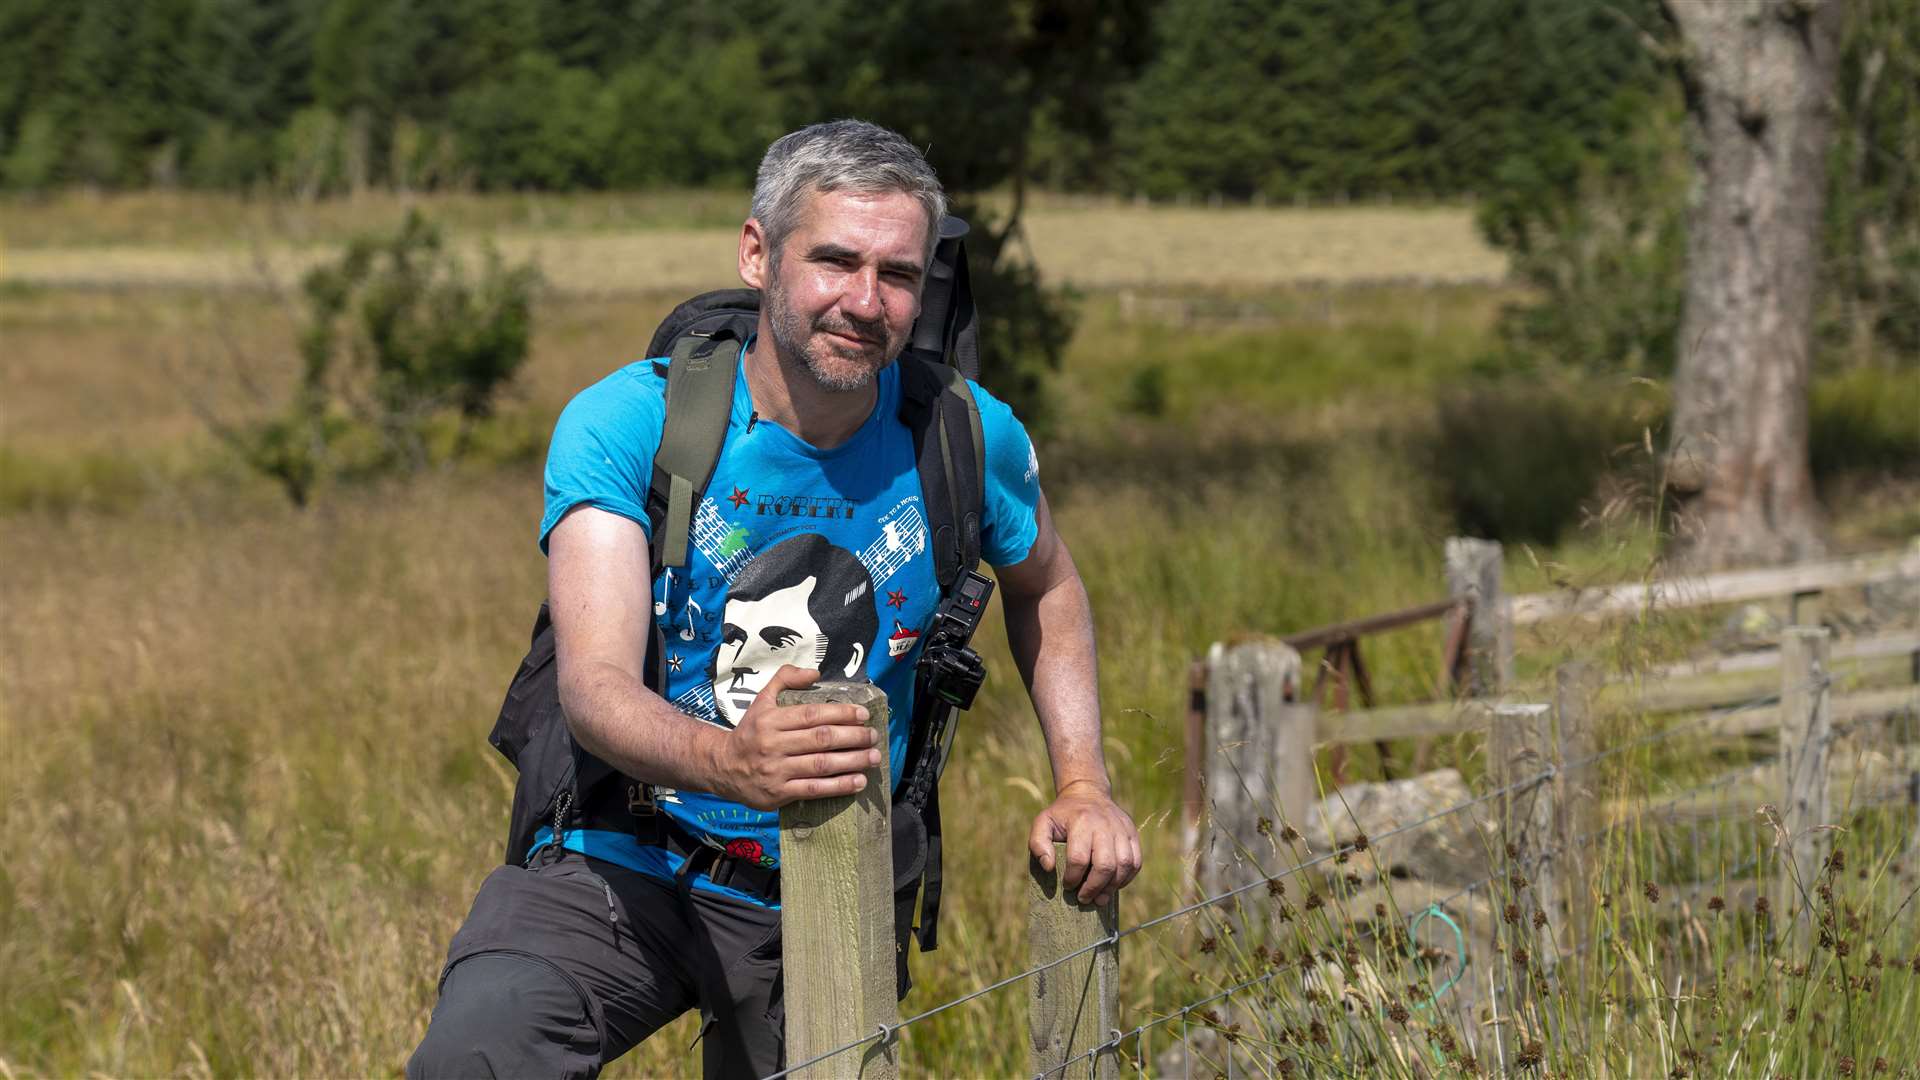 Iain Robertson chats to John Davidson in the latest episode of the Active Outdoors podcast. Picture: BBC Scotland